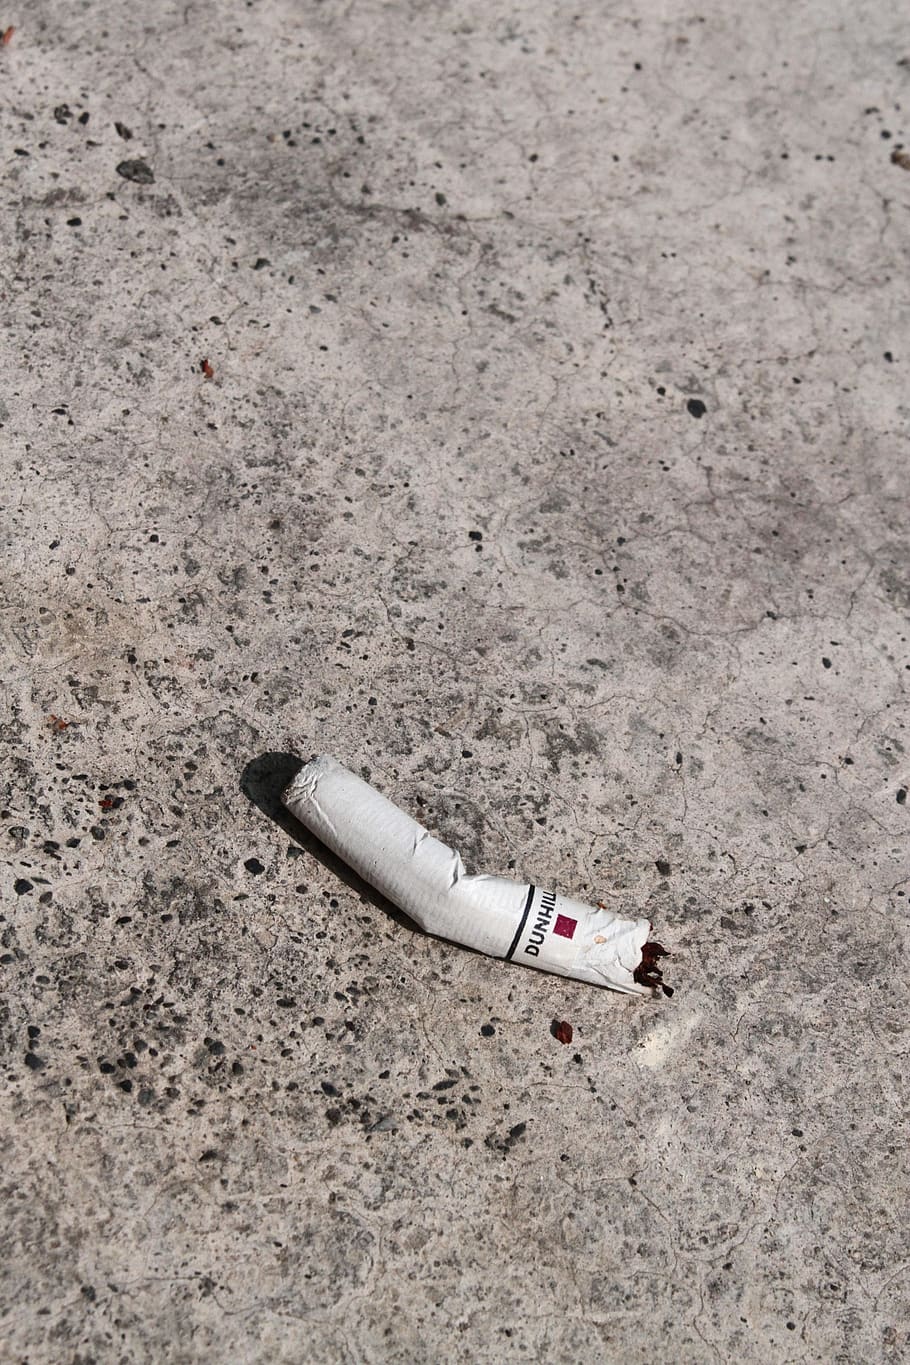 cigarette butts, concrete floor, litter anywhere, high angle view, cigarette, day, bad habit, cigarette butt, social issues, single object